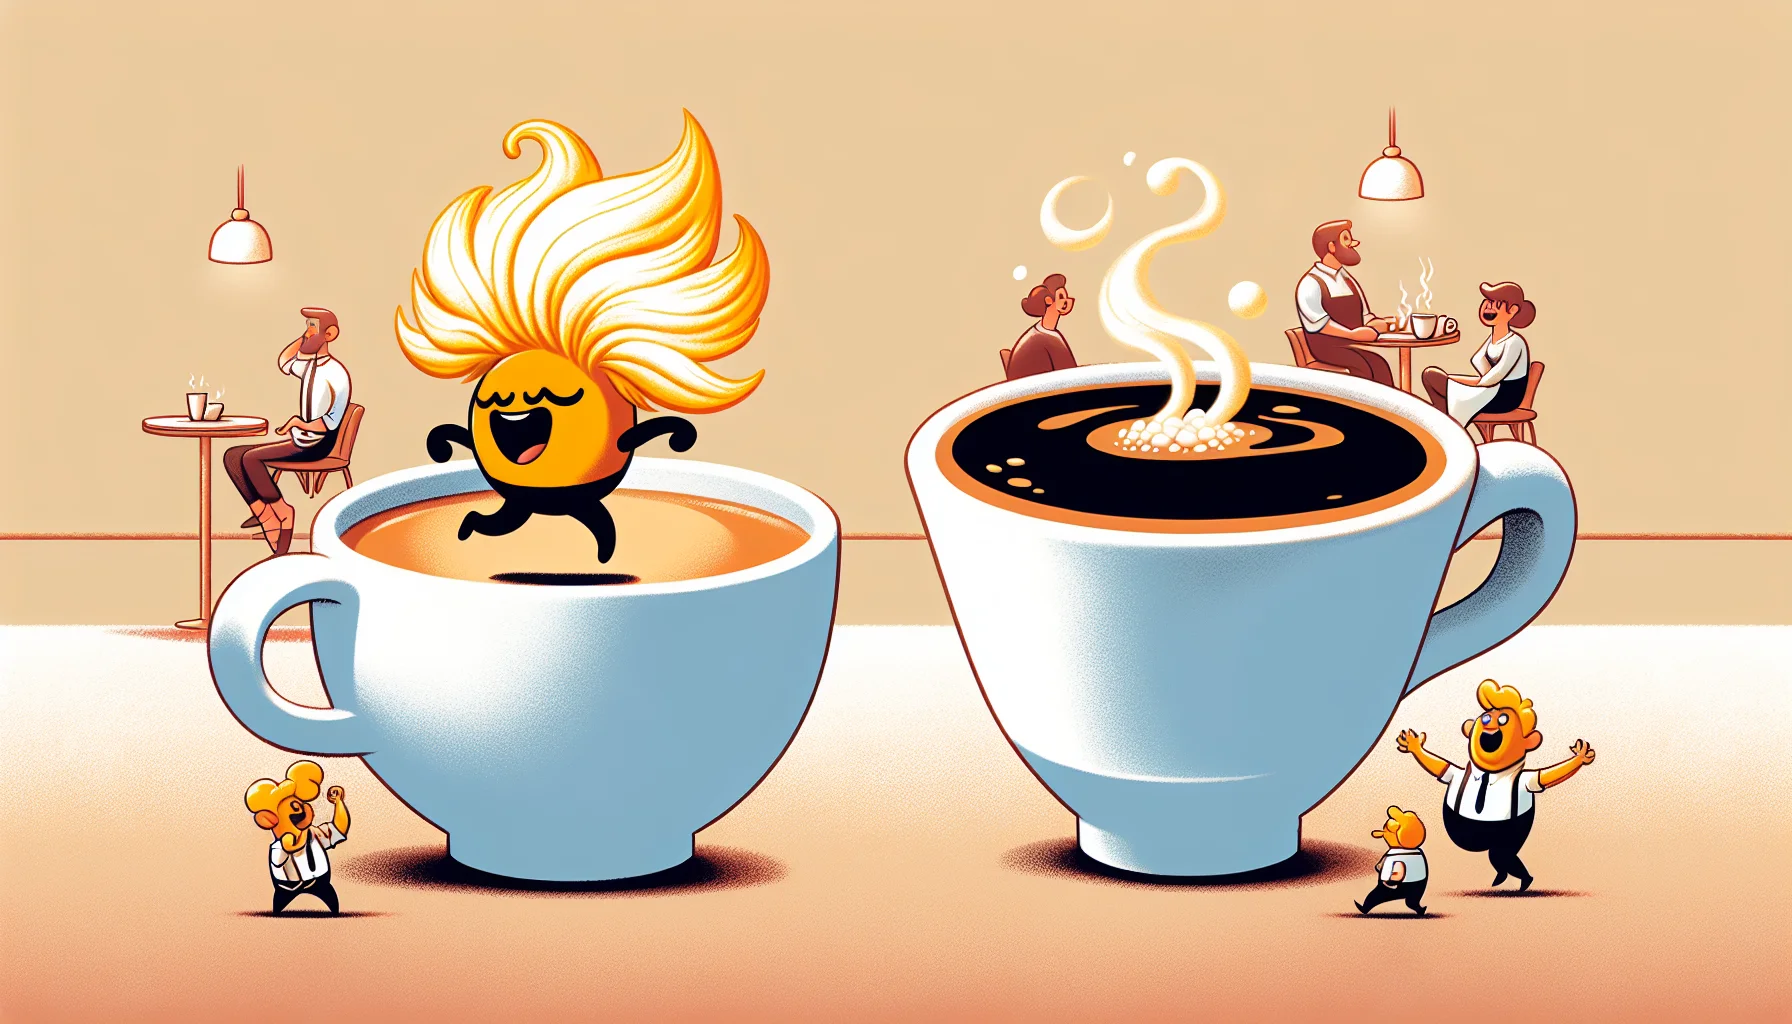 Create a whimsical image that brings humour to the world of coffee. Picture a scene in an average cafe with two gigantic coffee cups. Imagine, in the left cup, a cartoon figure of a boisterous blonde espresso, dancing and frolicking around the brim of the cup, its radiant warmth and frothy texture giving it life. On the right, depict a more sedate regular espresso, dozing off in its almost sluggish dark depth. Illustrate the contrast between the vibrant energy of the blonde espresso and the calmness of the regular espresso in a playful and enticing manner, tempting everyone to partake in their coffee adventure.